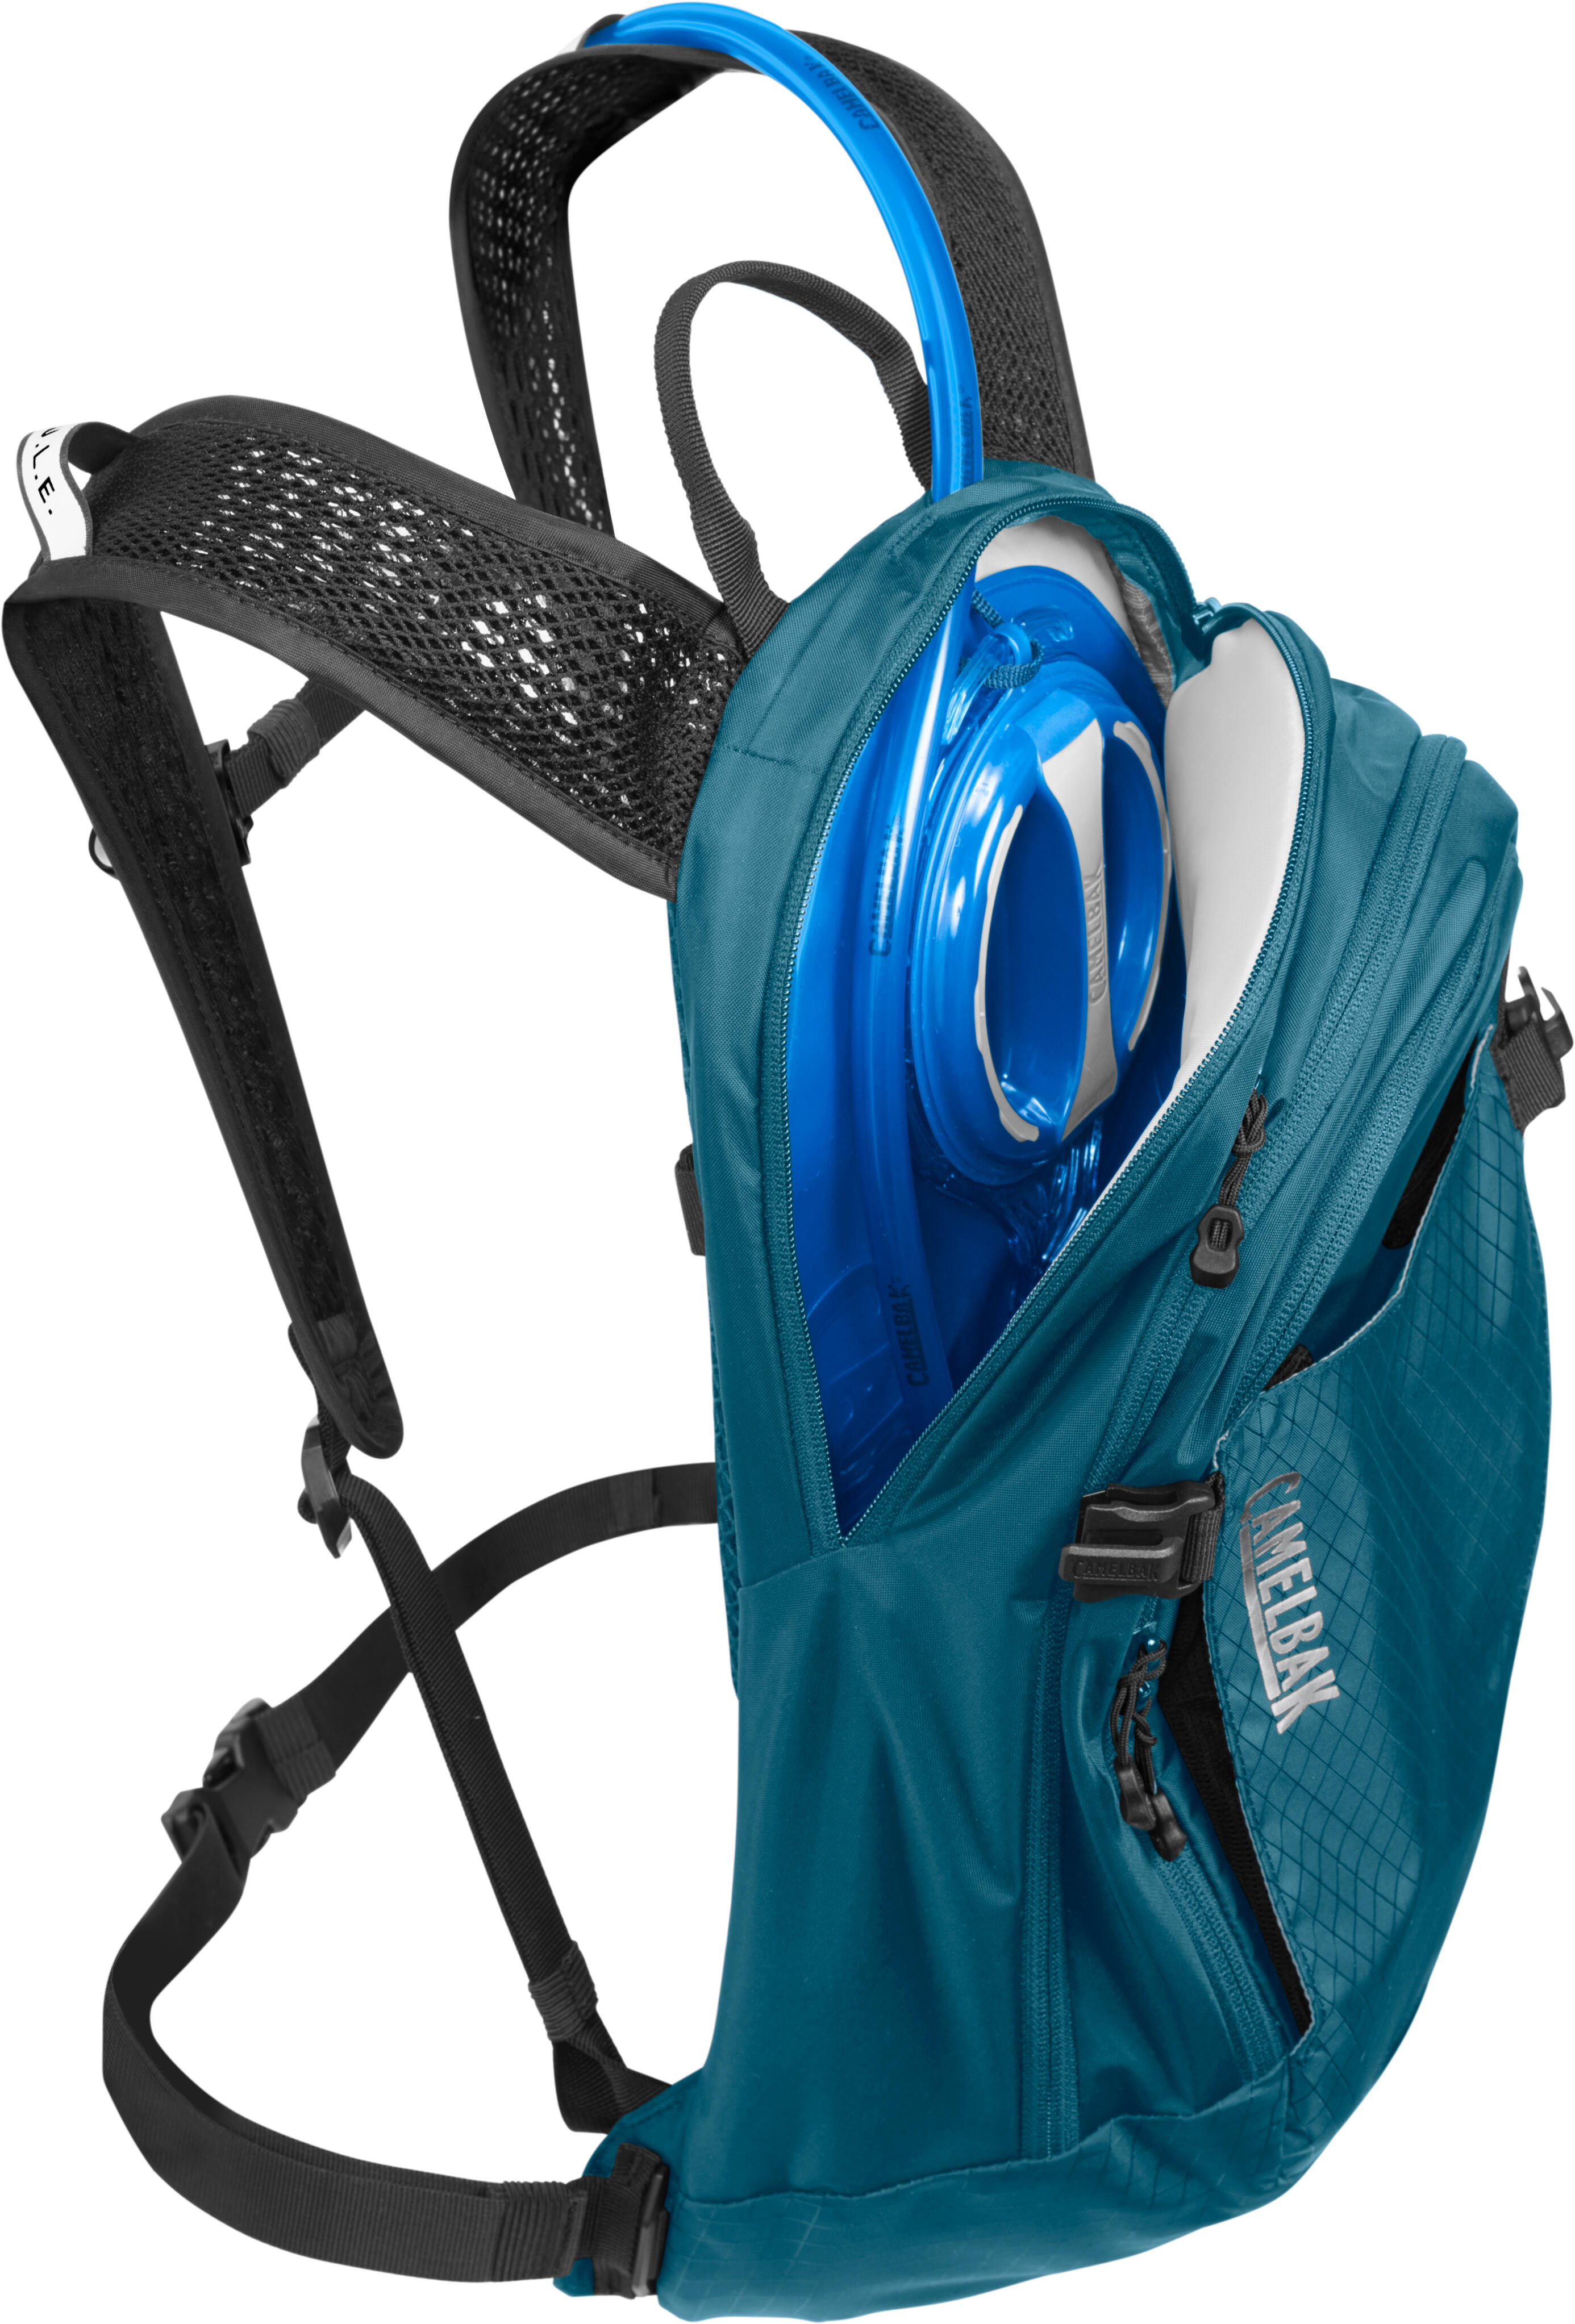 M.U.L.E. Hydration Pack 1with Reservoir 7/7